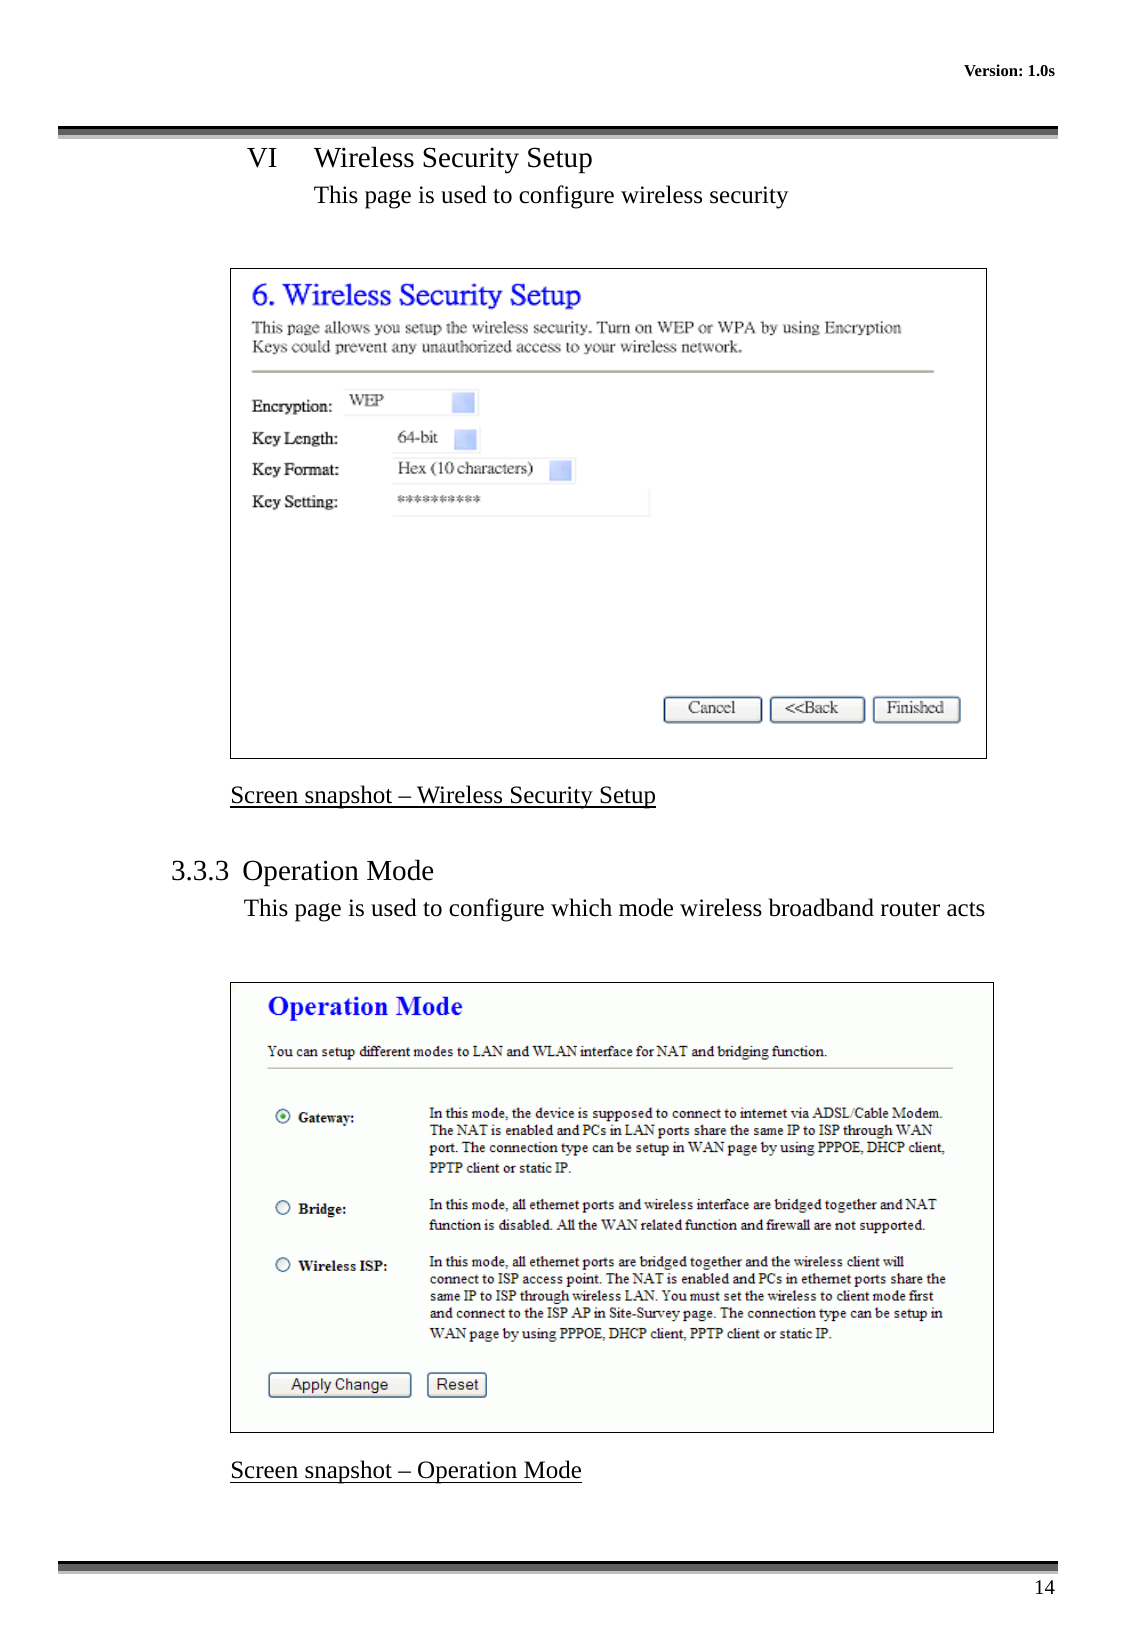      Version: 1.0s      14 VI  Wireless Security Setup This page is used to configure wireless security   Screen snapshot – Wireless Security Setup  3.3.3  Operation Mode This page is used to configure which mode wireless broadband router acts   Screen snapshot – Operation Mode  